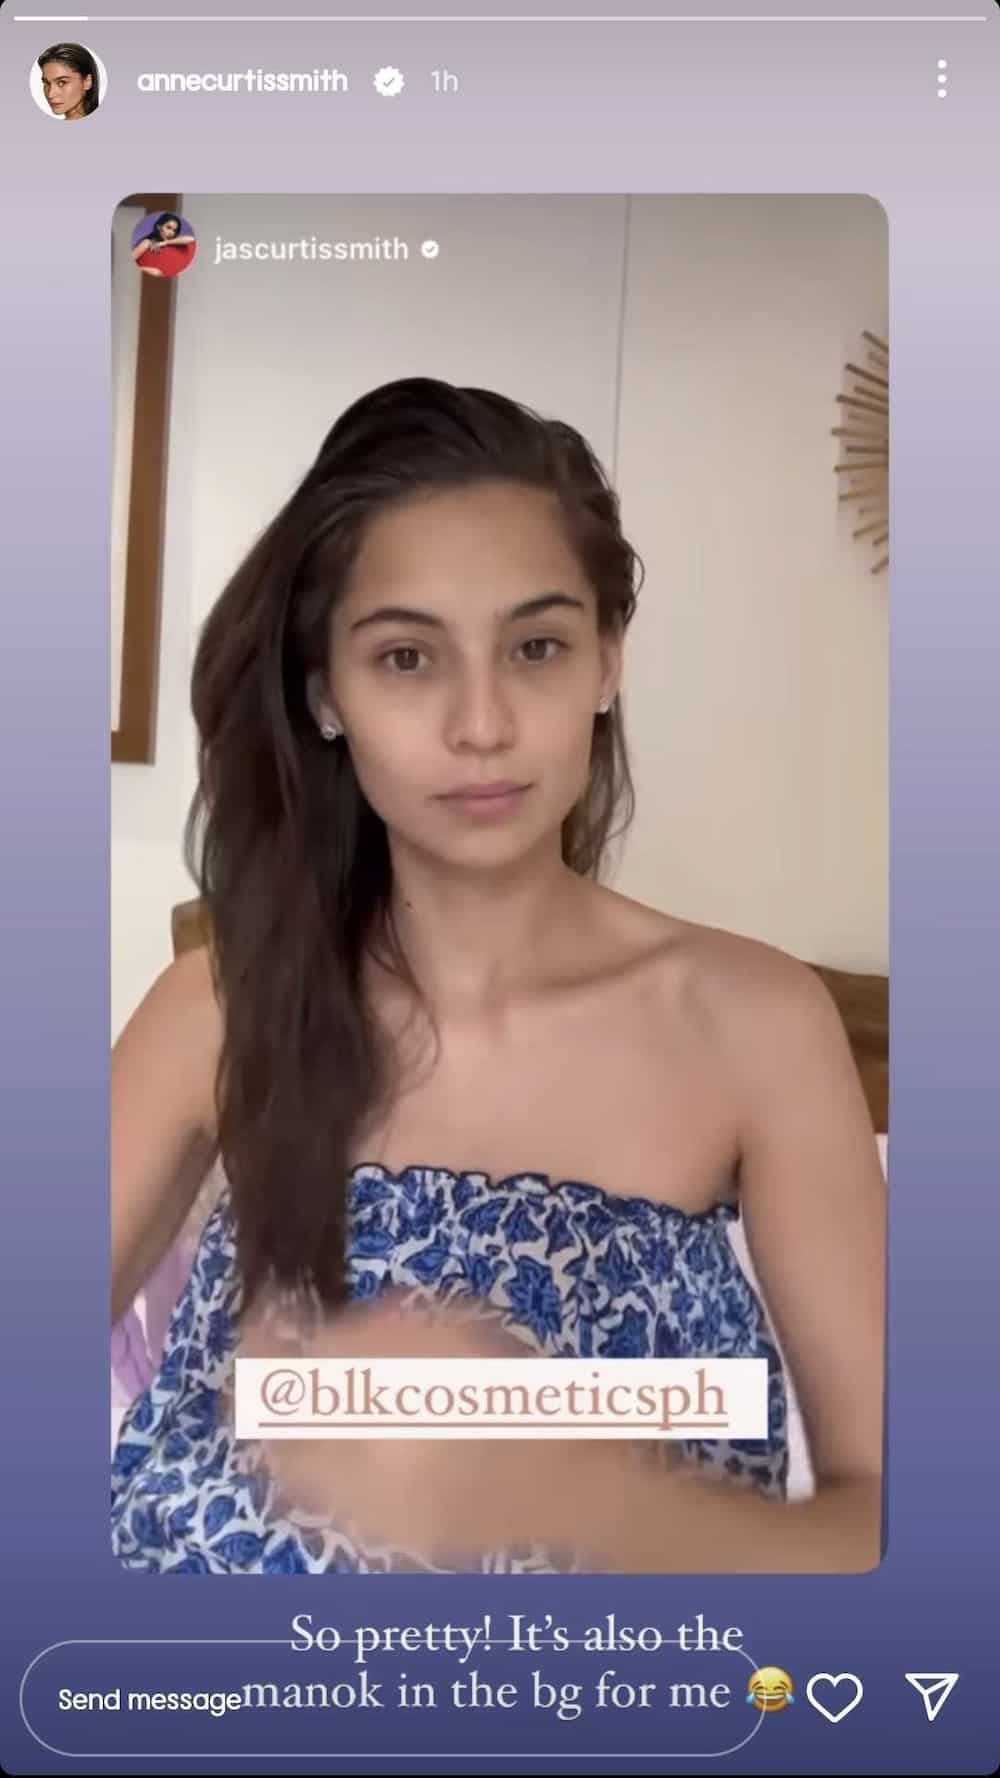 Anne Curtis, naaliw sa makeup video ni Jasmine Curtis: "The manok in the BG"